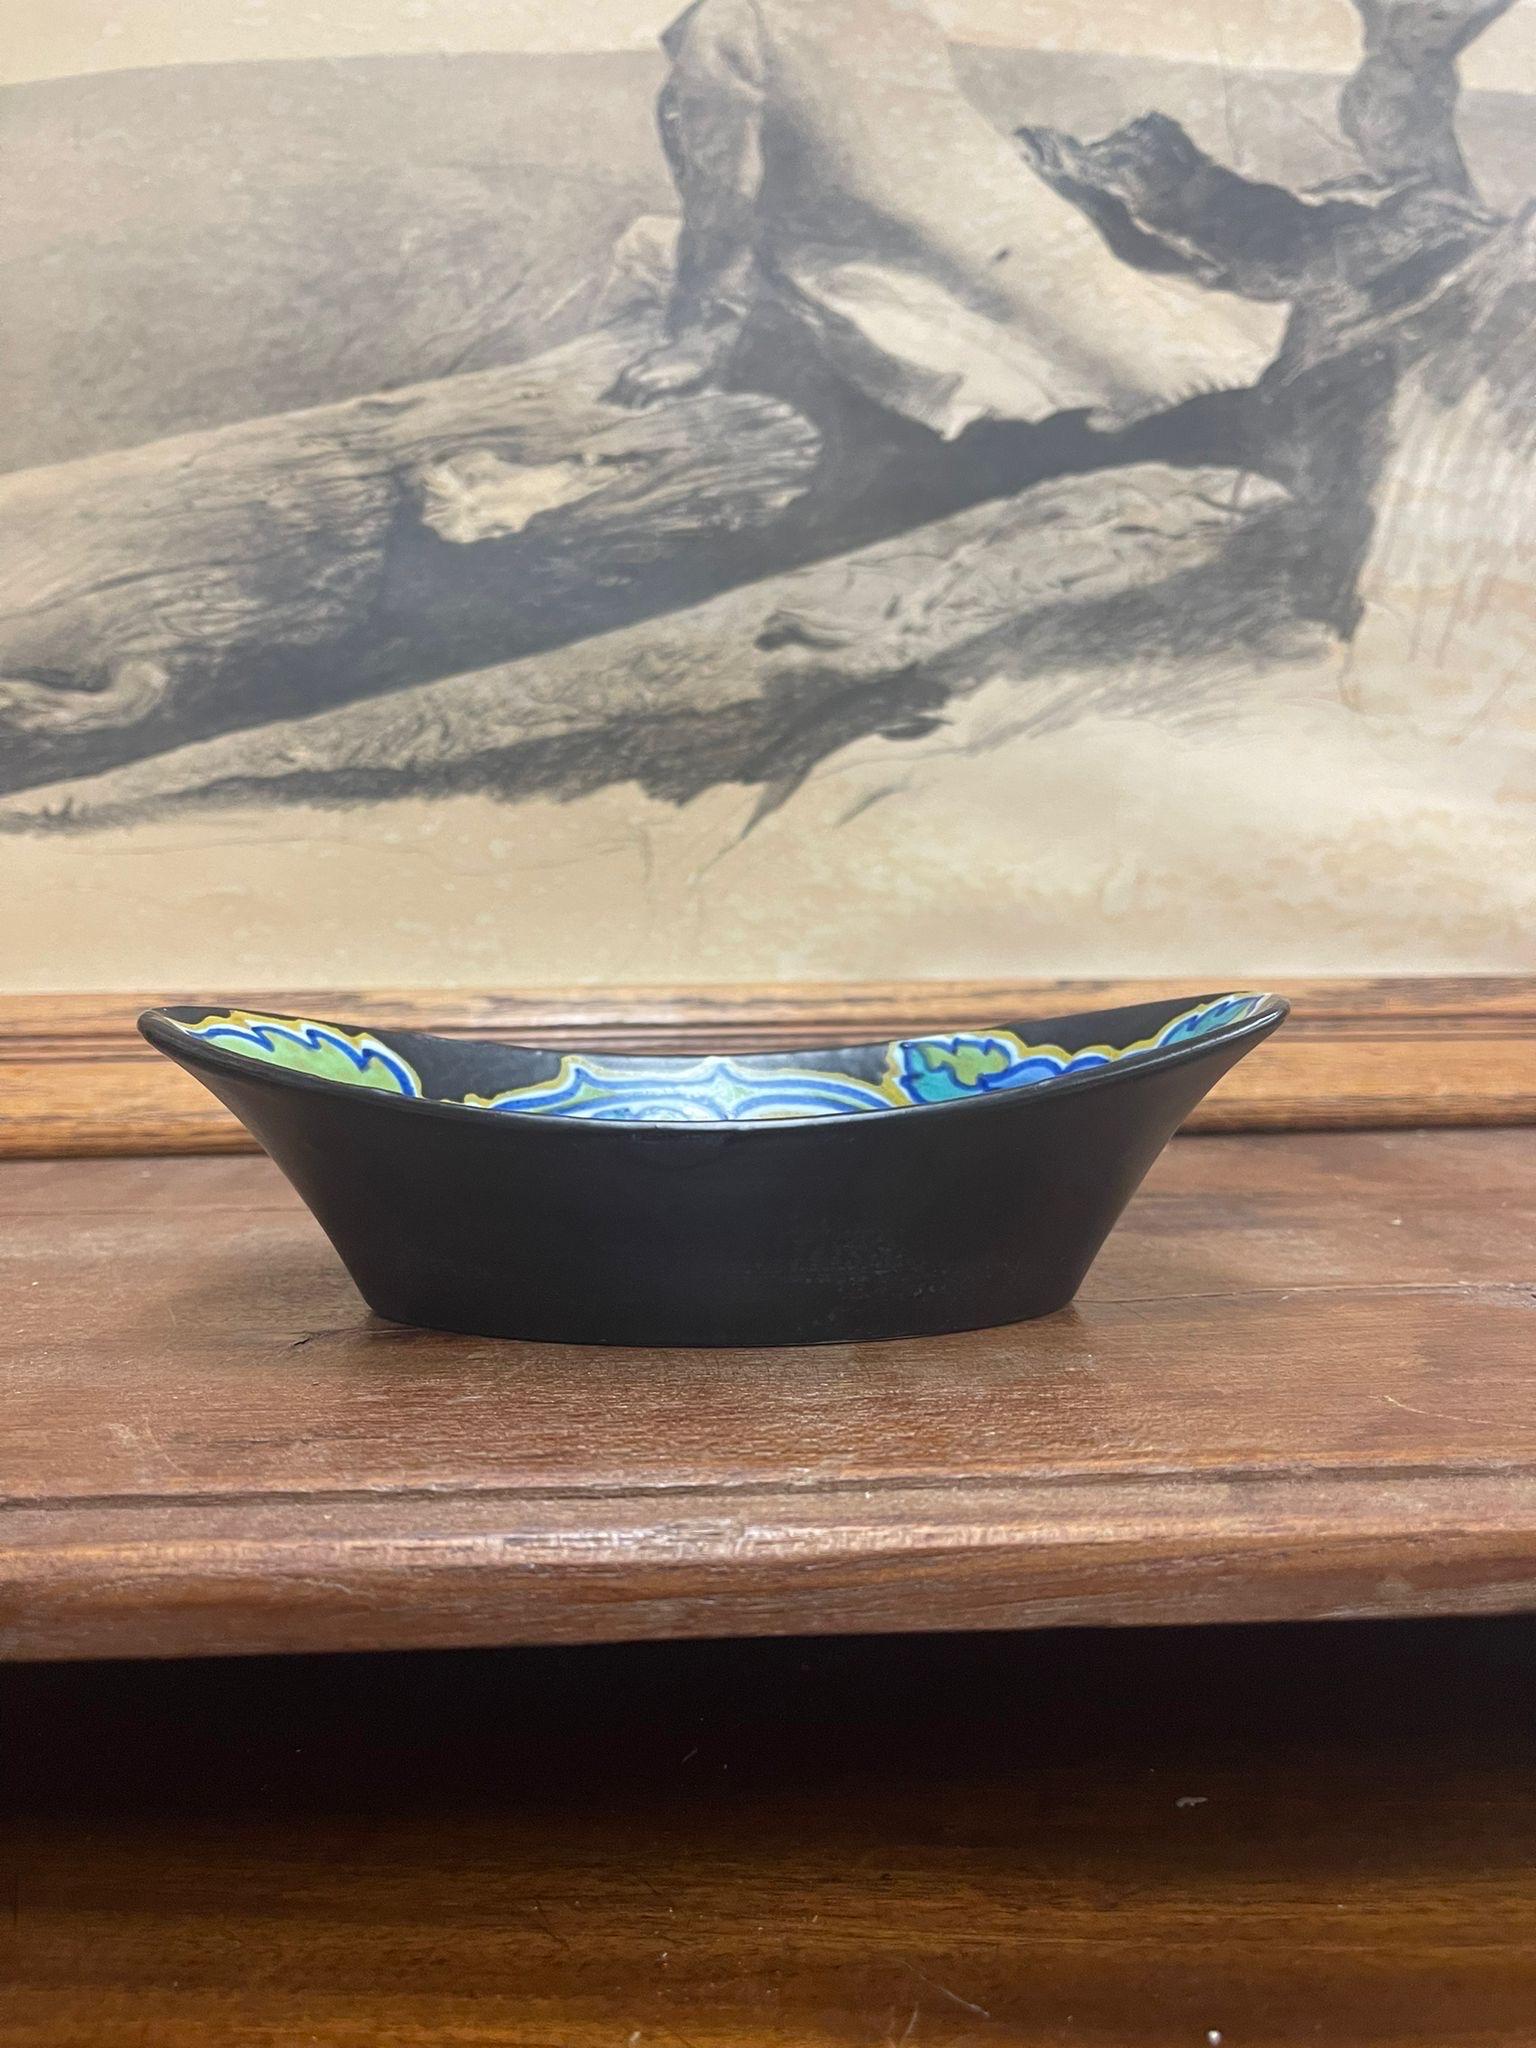 Imported Dish From Holland. Decorative Blue Floral Motif. Makers Mark on the Bottom as Shown. Vintage Condition Consistent with Age as Pictured.

Dimensions. 8 W ; 4 D ; 3 H